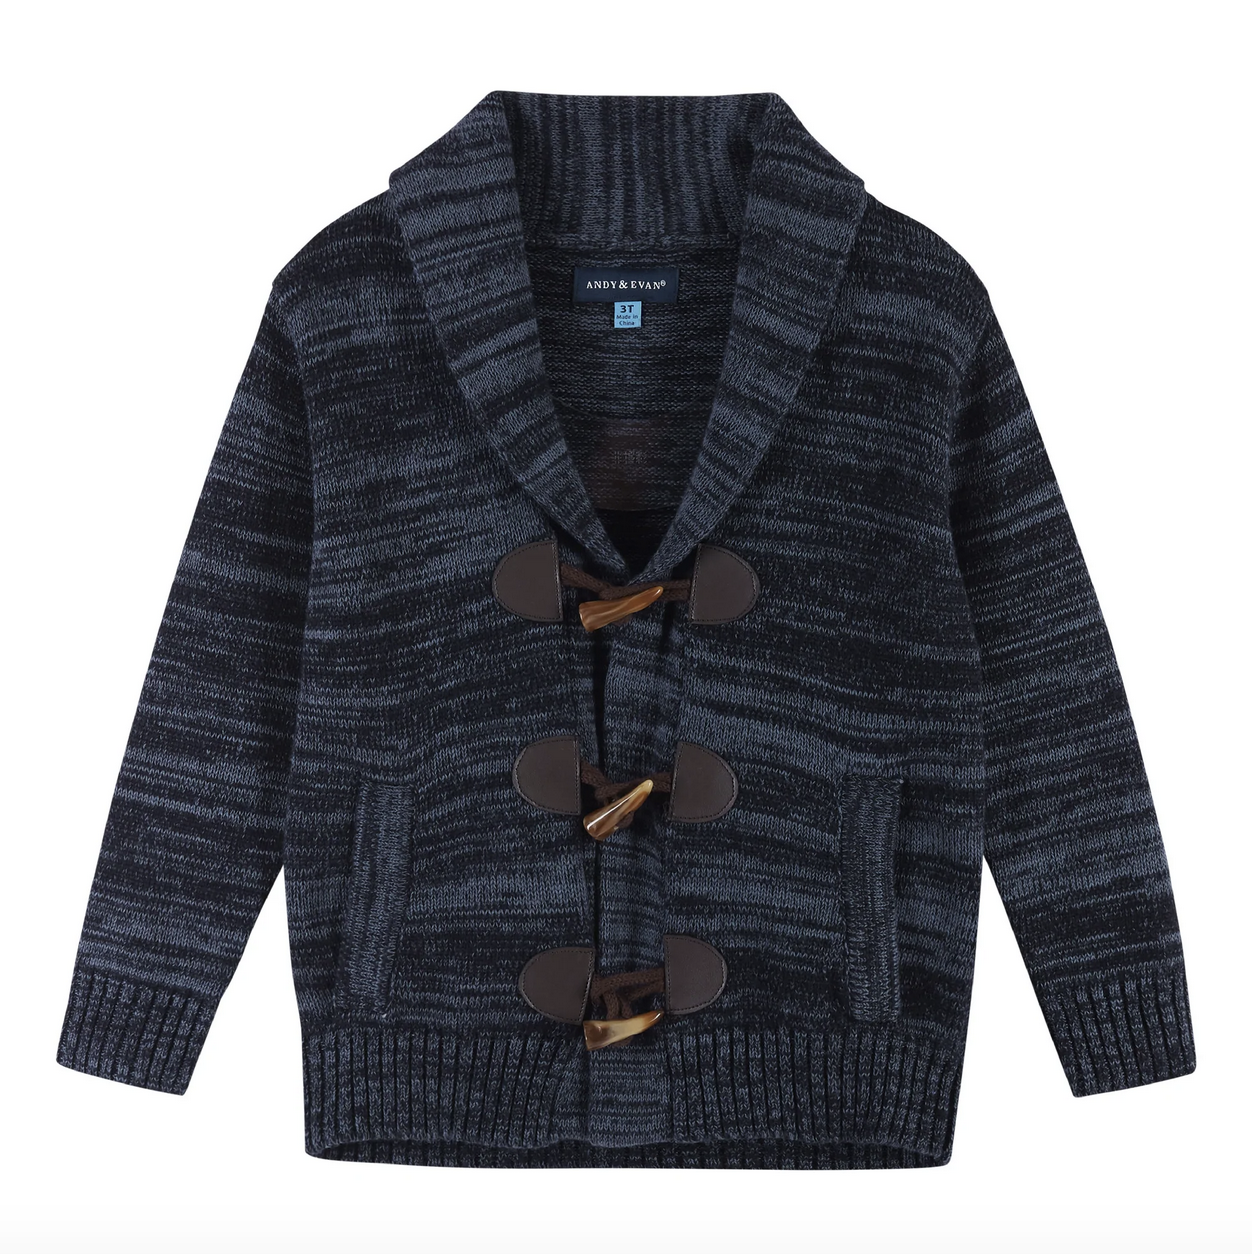 Andy & Evan boys 3-Piece Marbled Navy Toggle Cardigan Sweater Set - little birdies